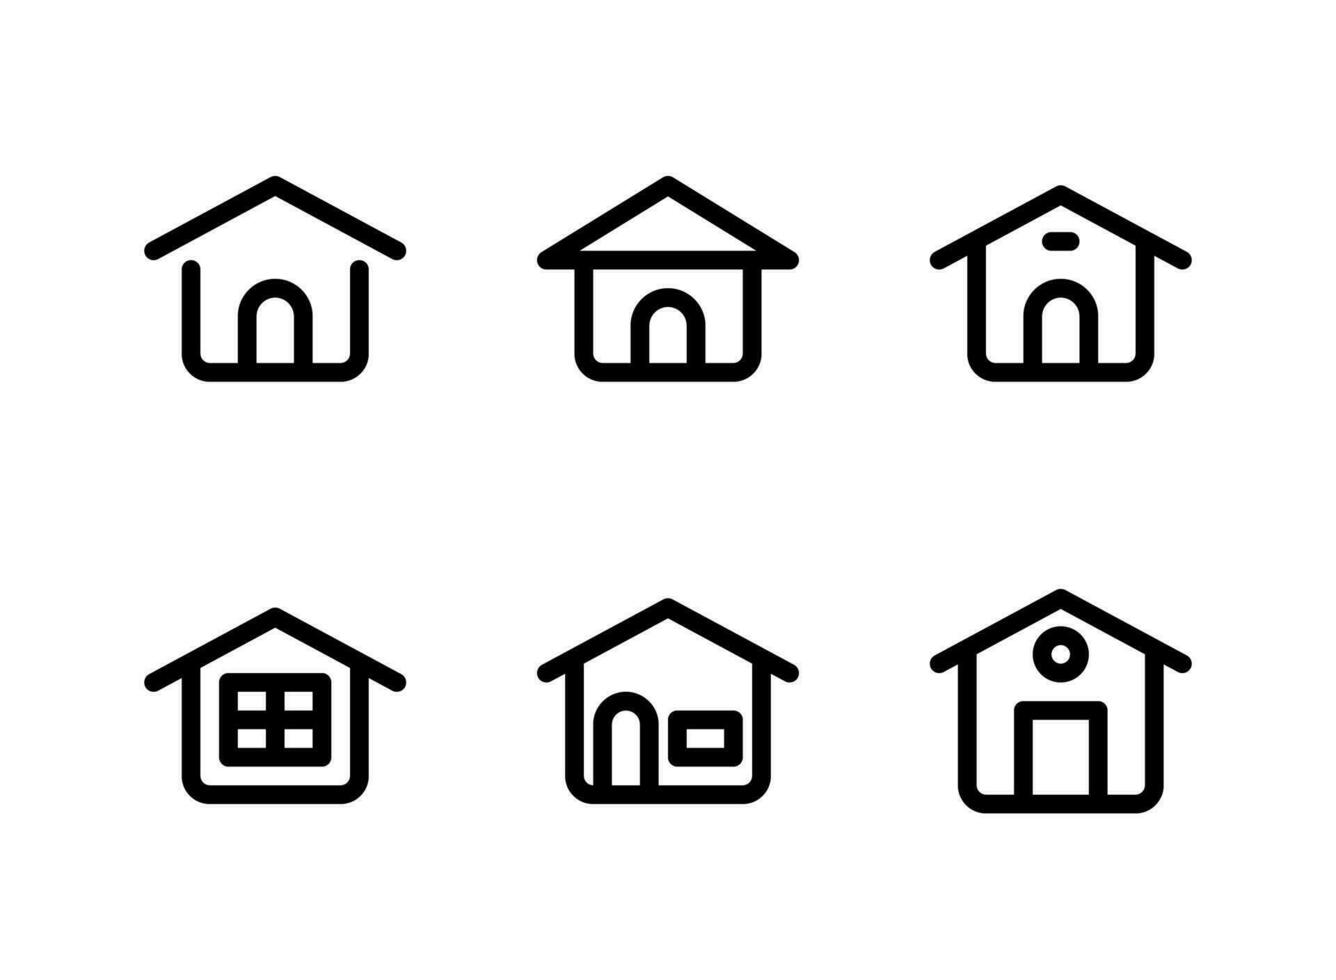 Simple Set of House Related Vector Line Icons. Contains Icons as Simple Home, Window and more.